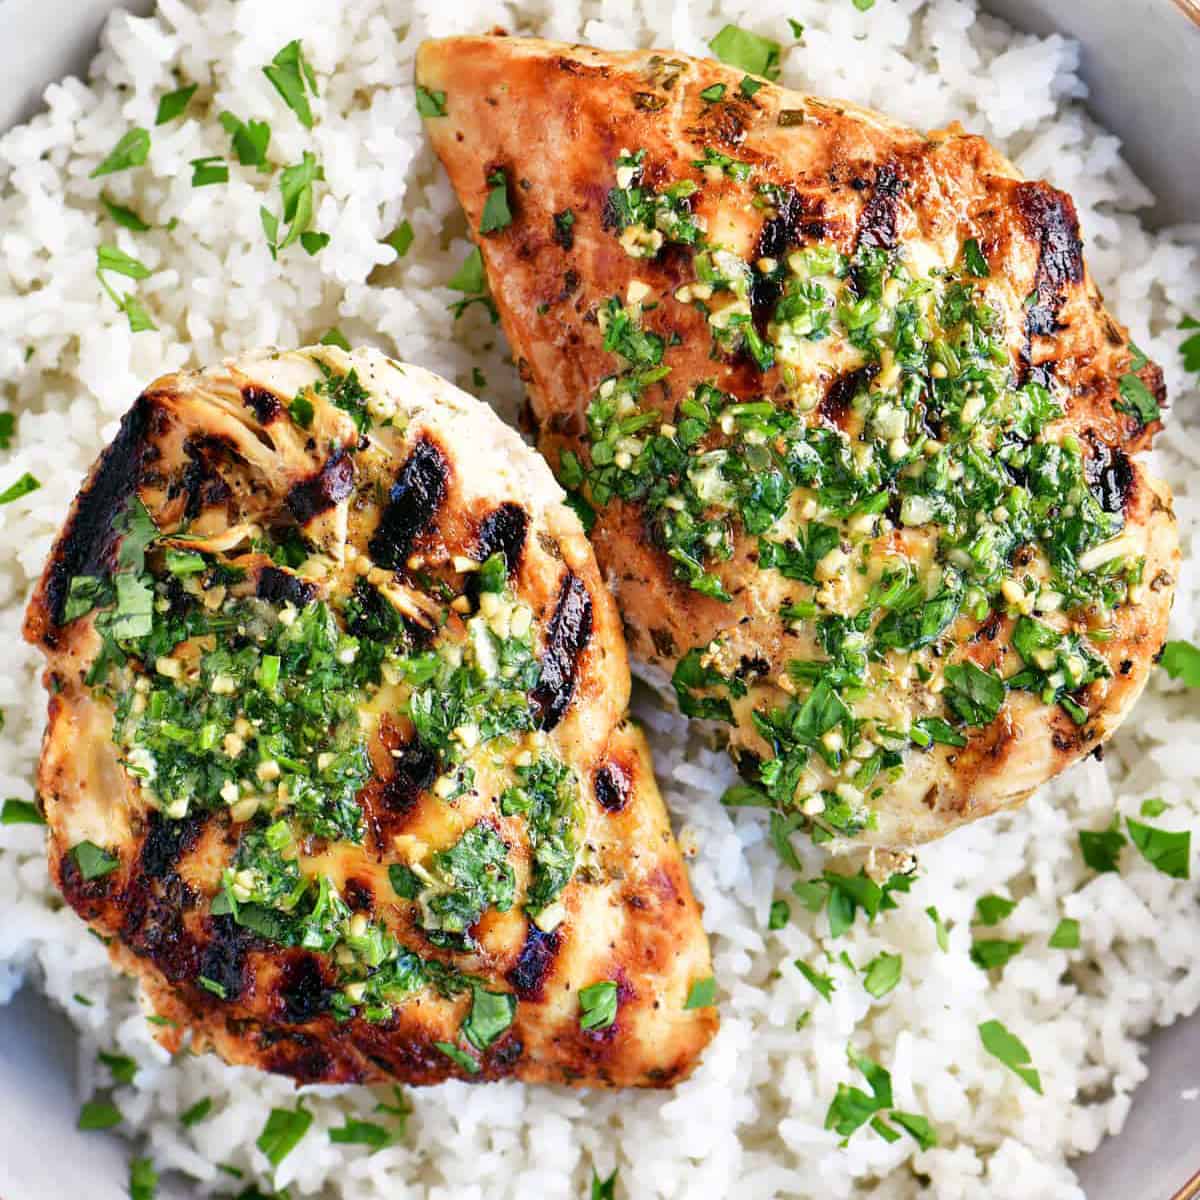 two cilantro lime chicken breasts on a bed of rice